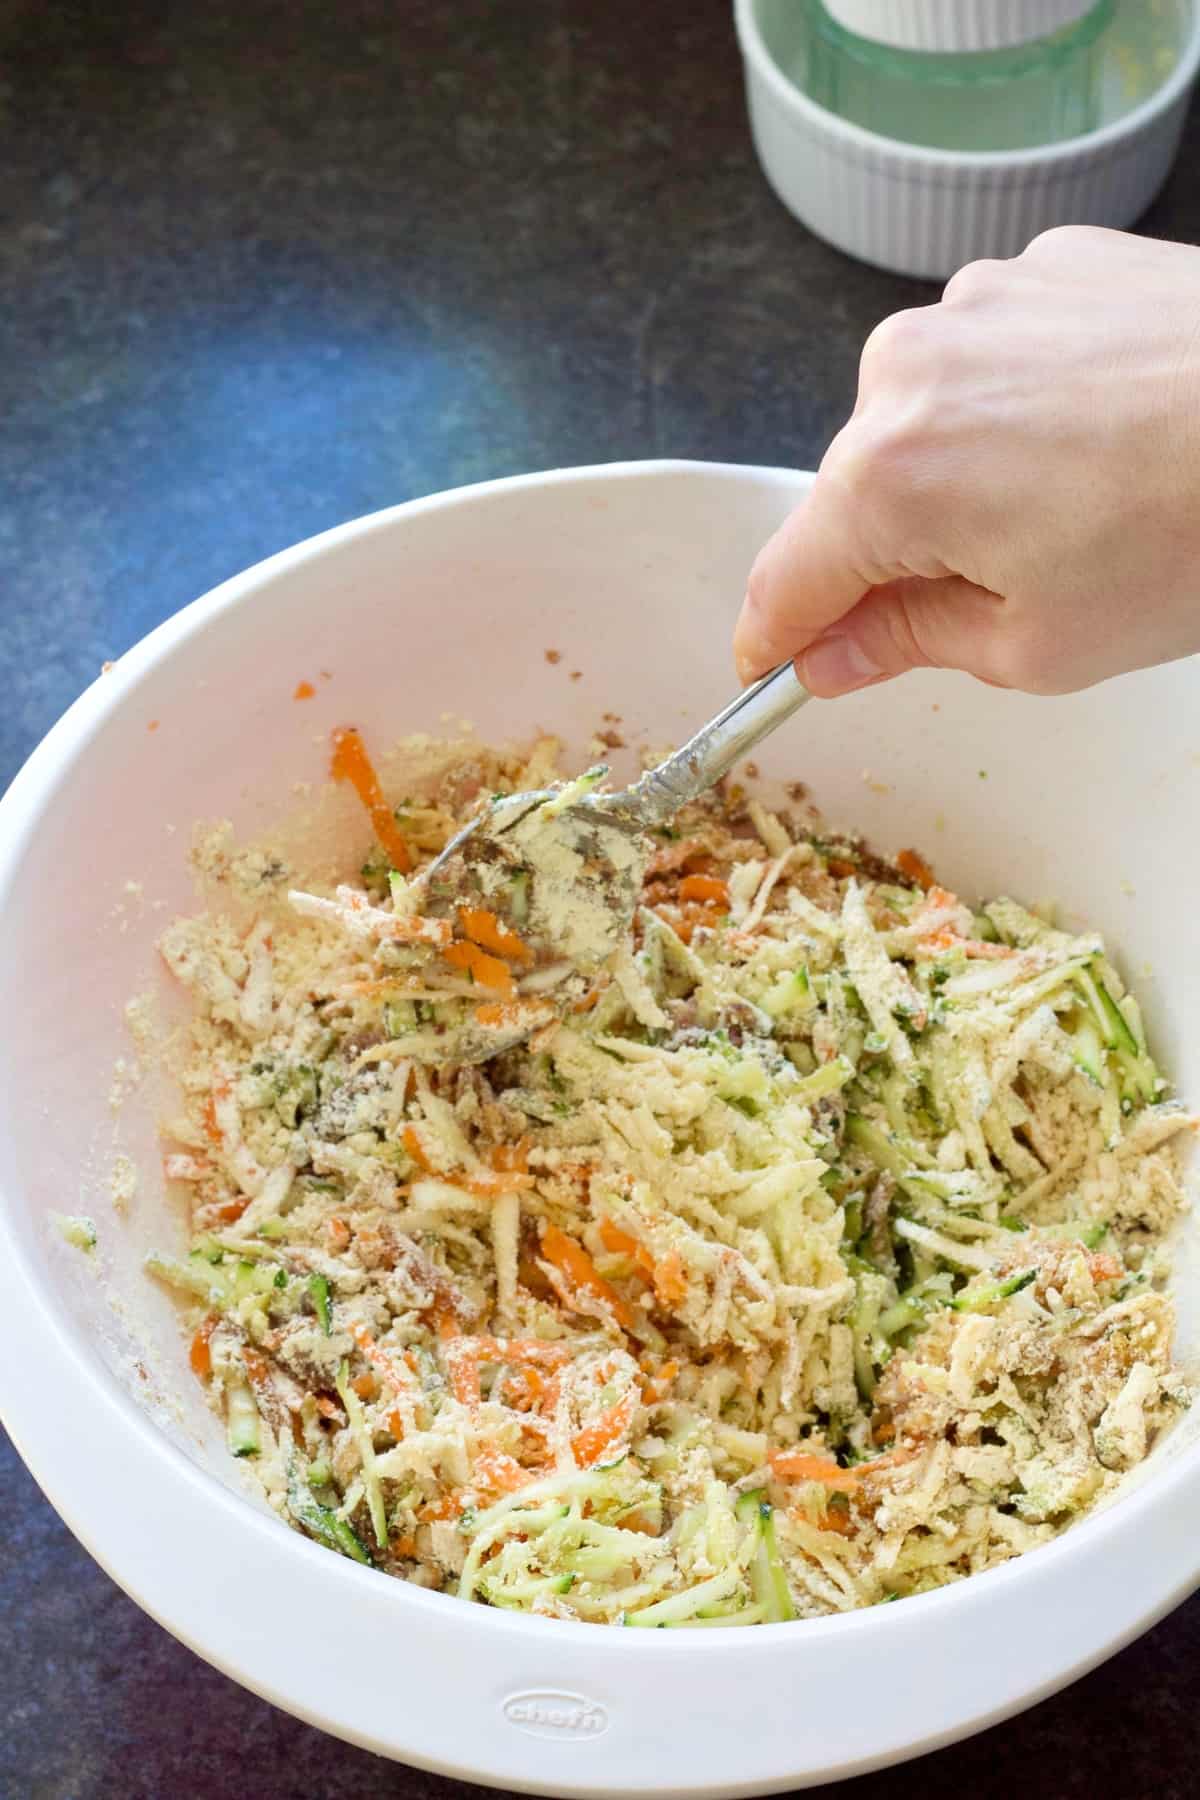 Hand mixing ingredients in a bowl.